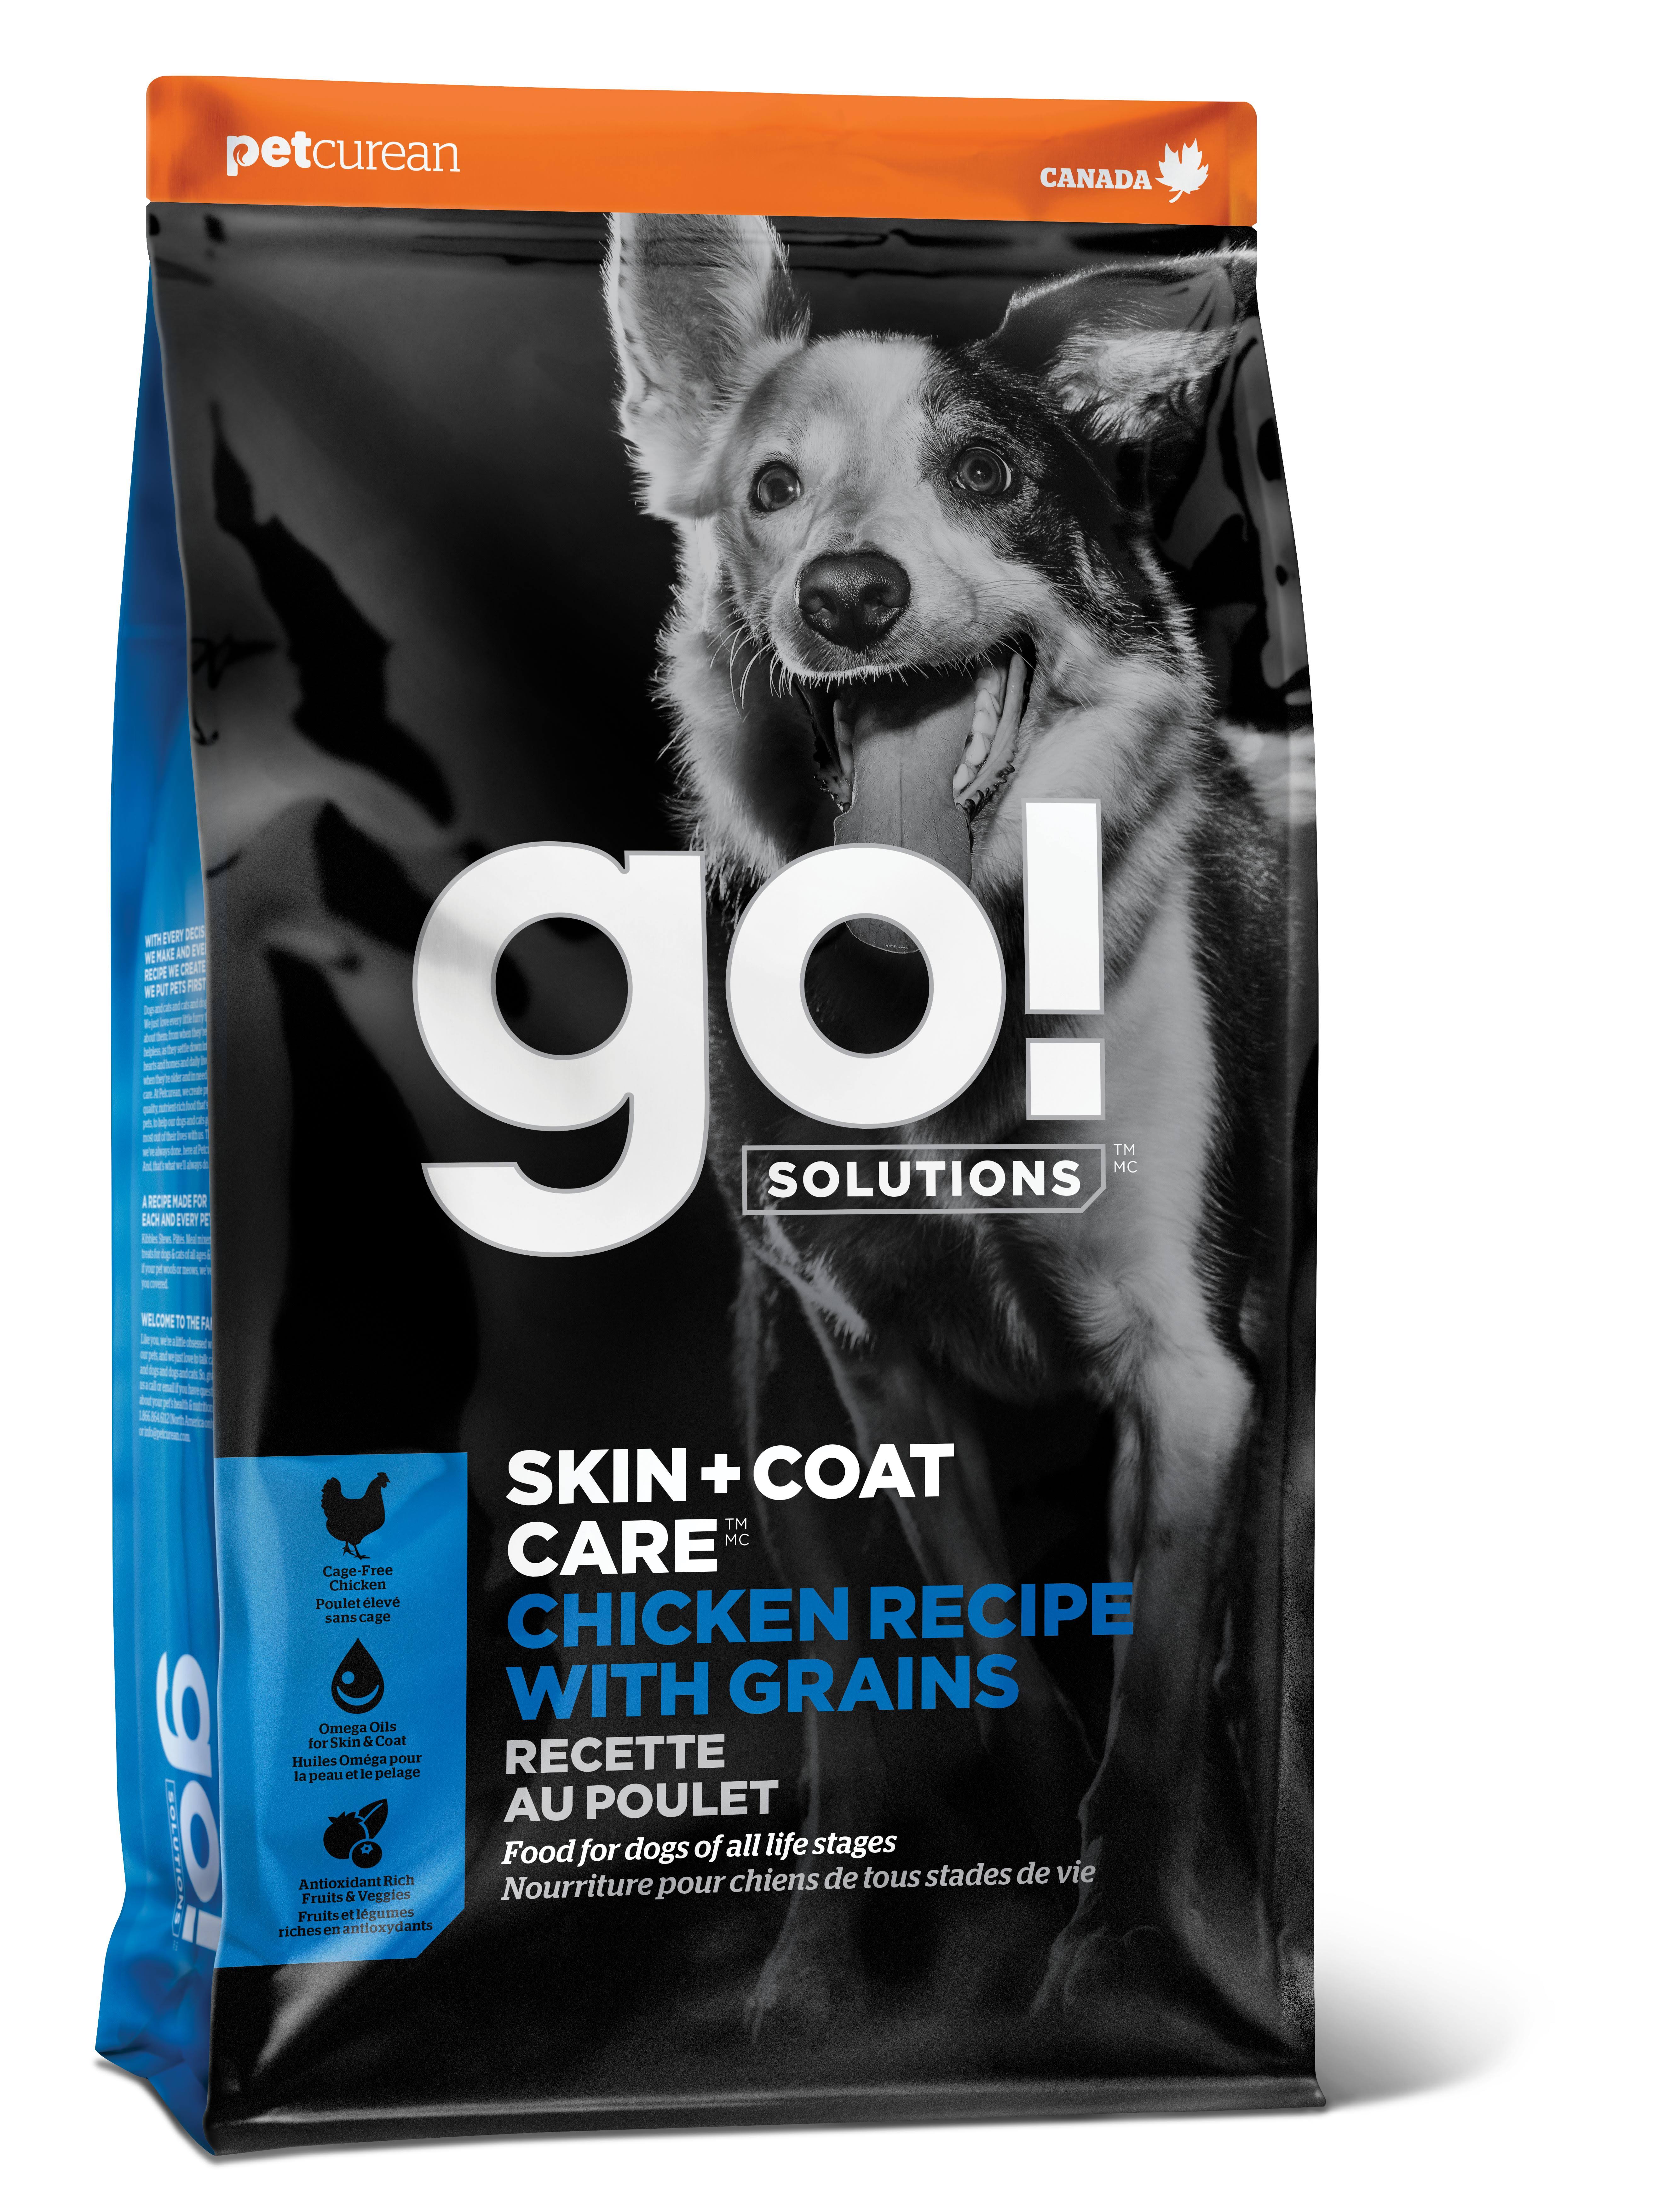 Go! Solutions Skin + Coat Care Chicken Recipe Dry Dog Food, 25 Pounds